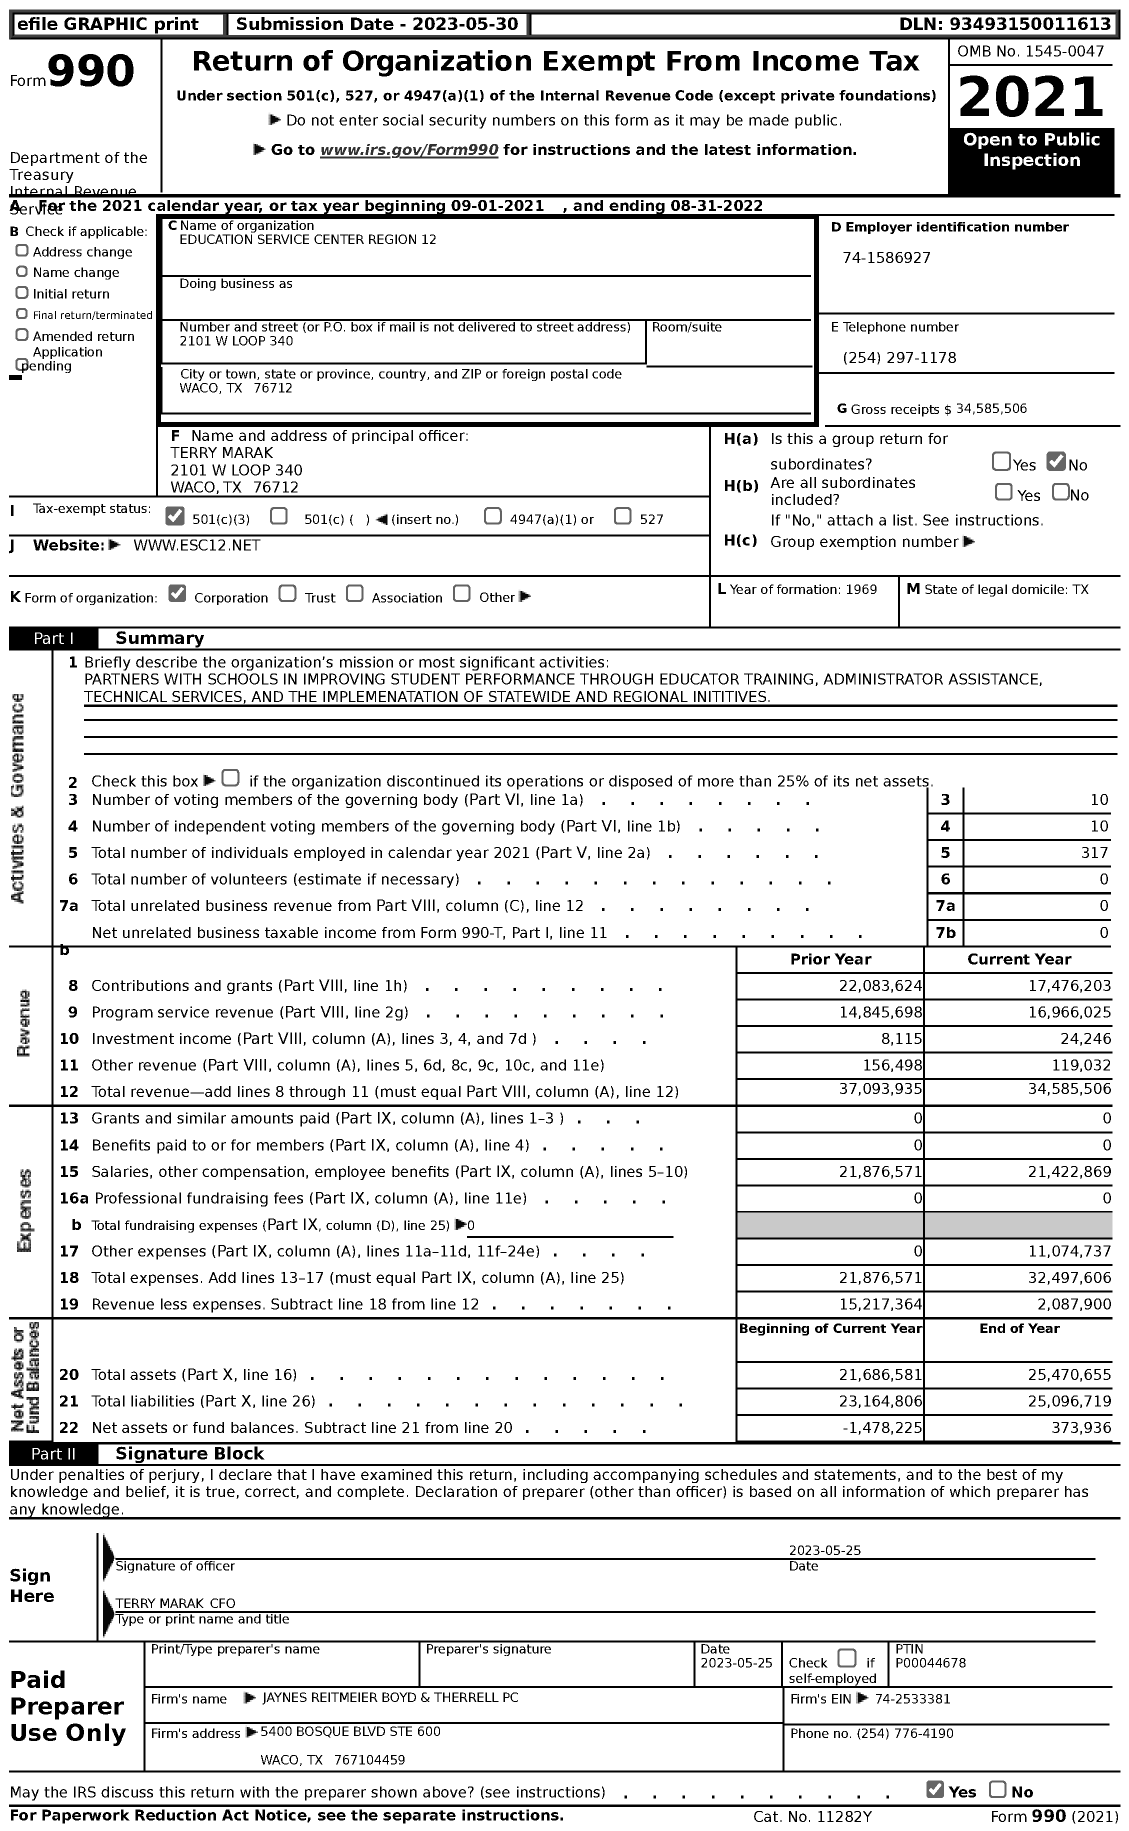 Image of first page of 2021 Form 990 for Education Service Center Region 12 (ESC Region 12)